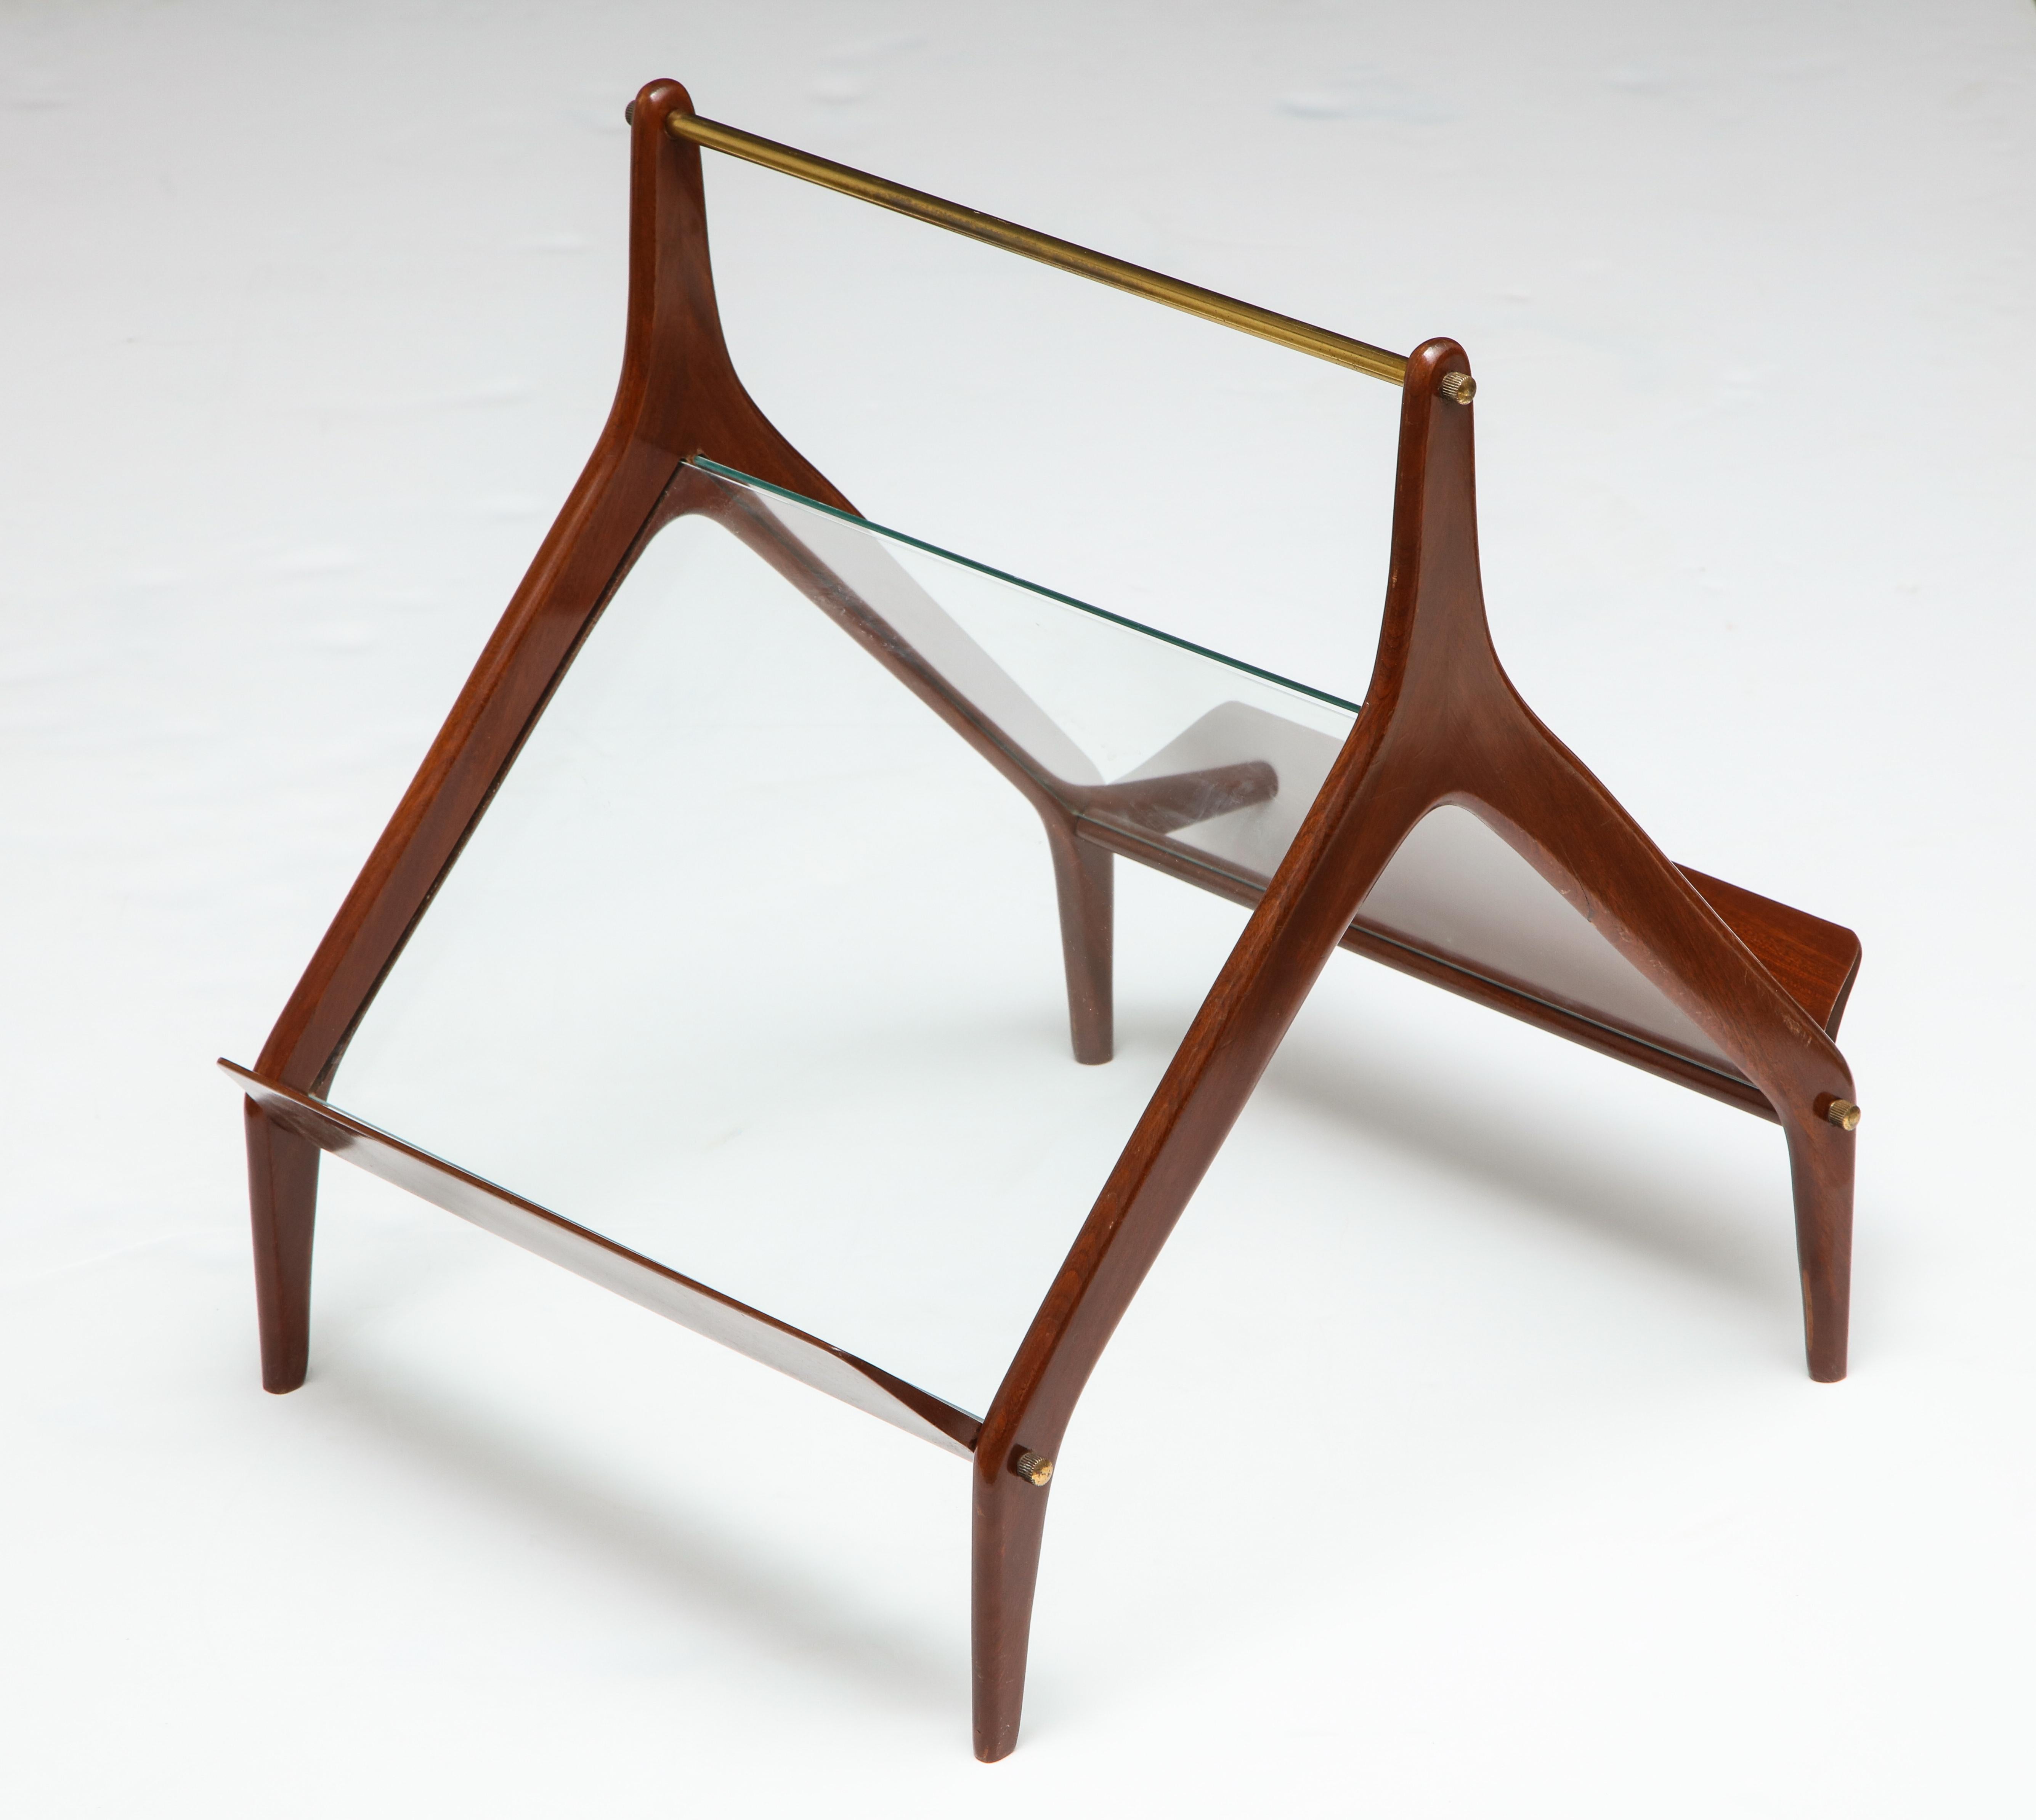 Mahogany and glass magazine rack
Refinished
Brass accent,
Italy, 1950s.